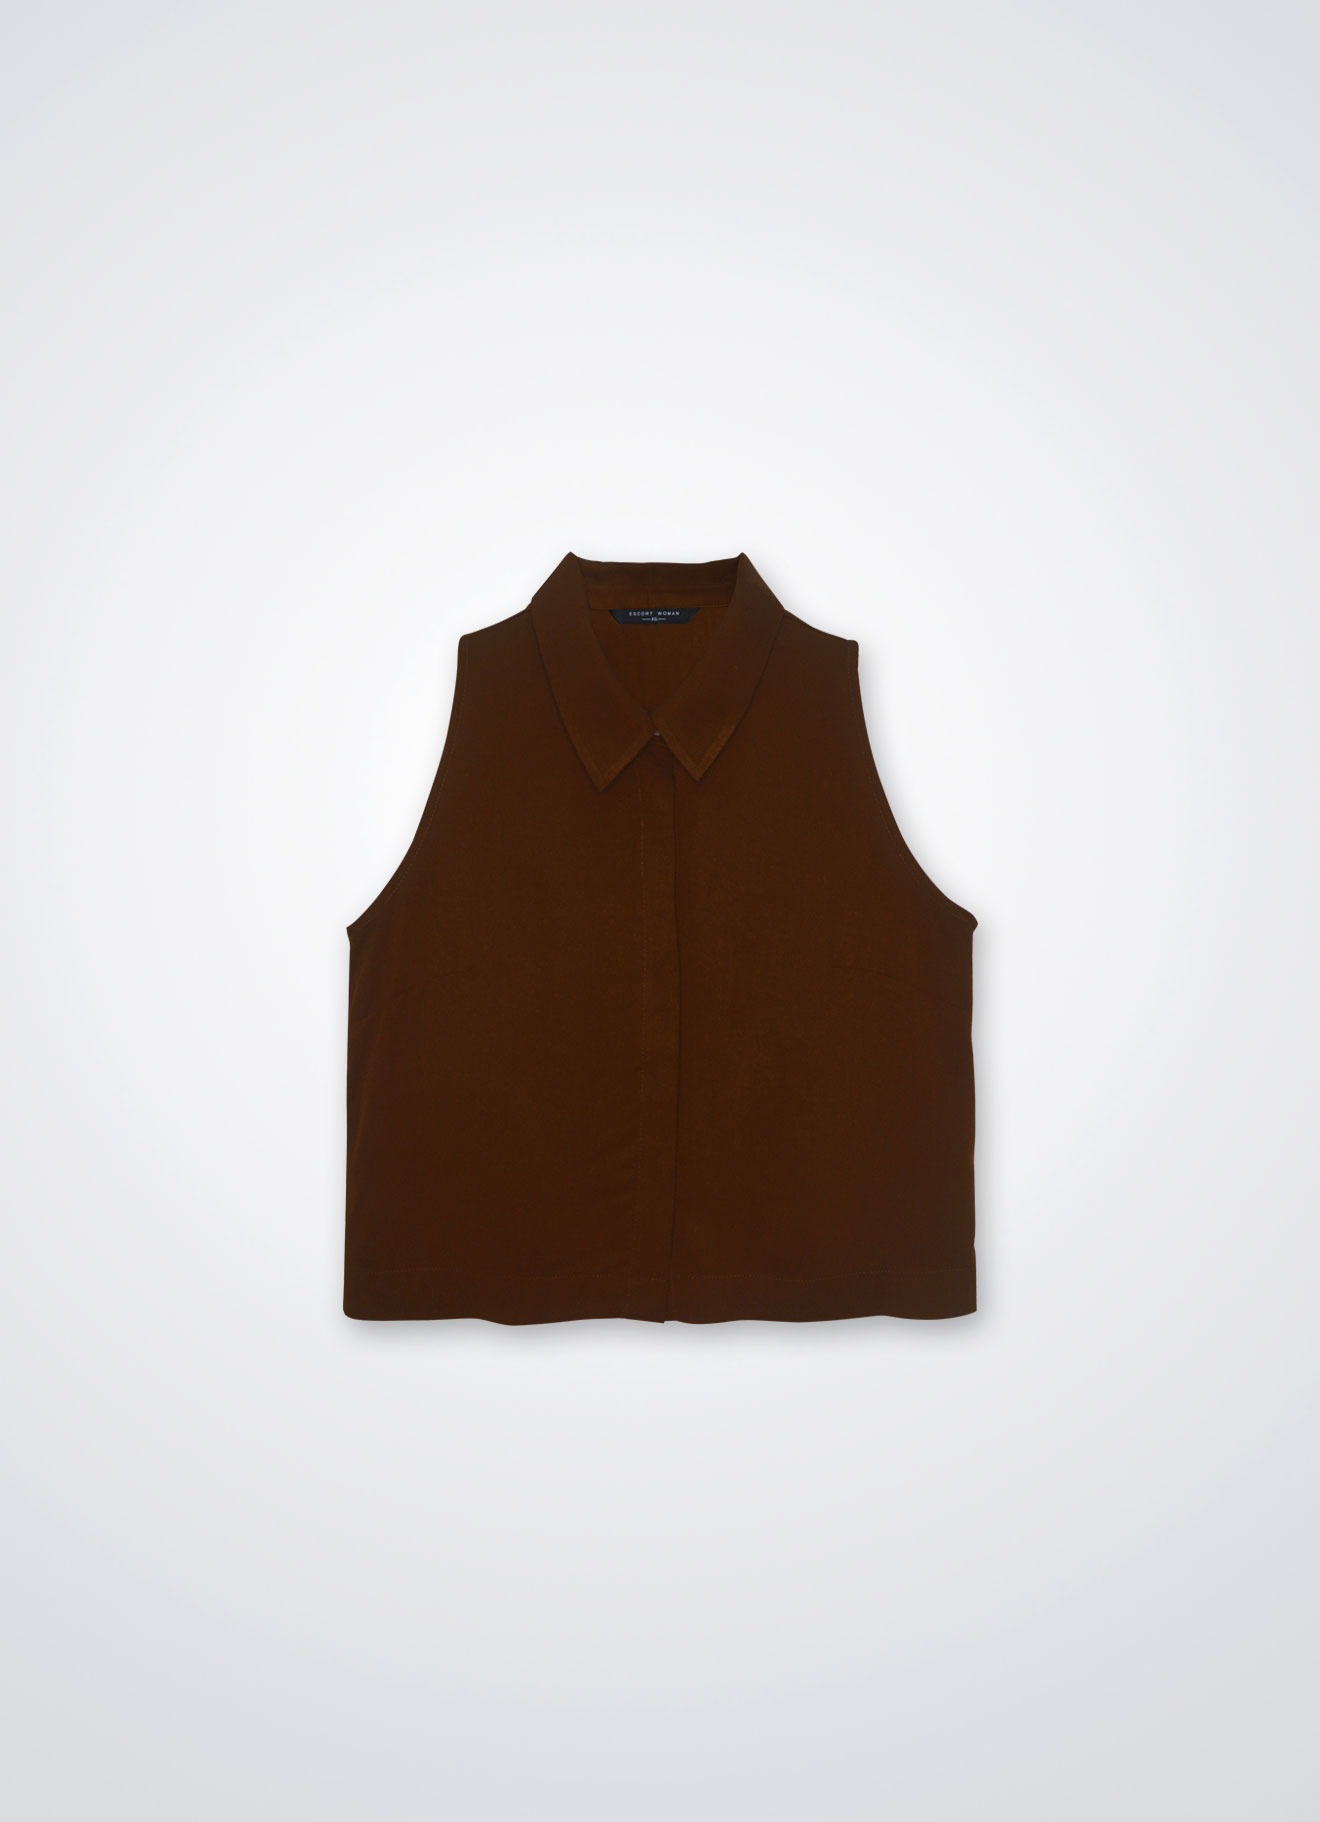 Friar-Brown by Sleeveless